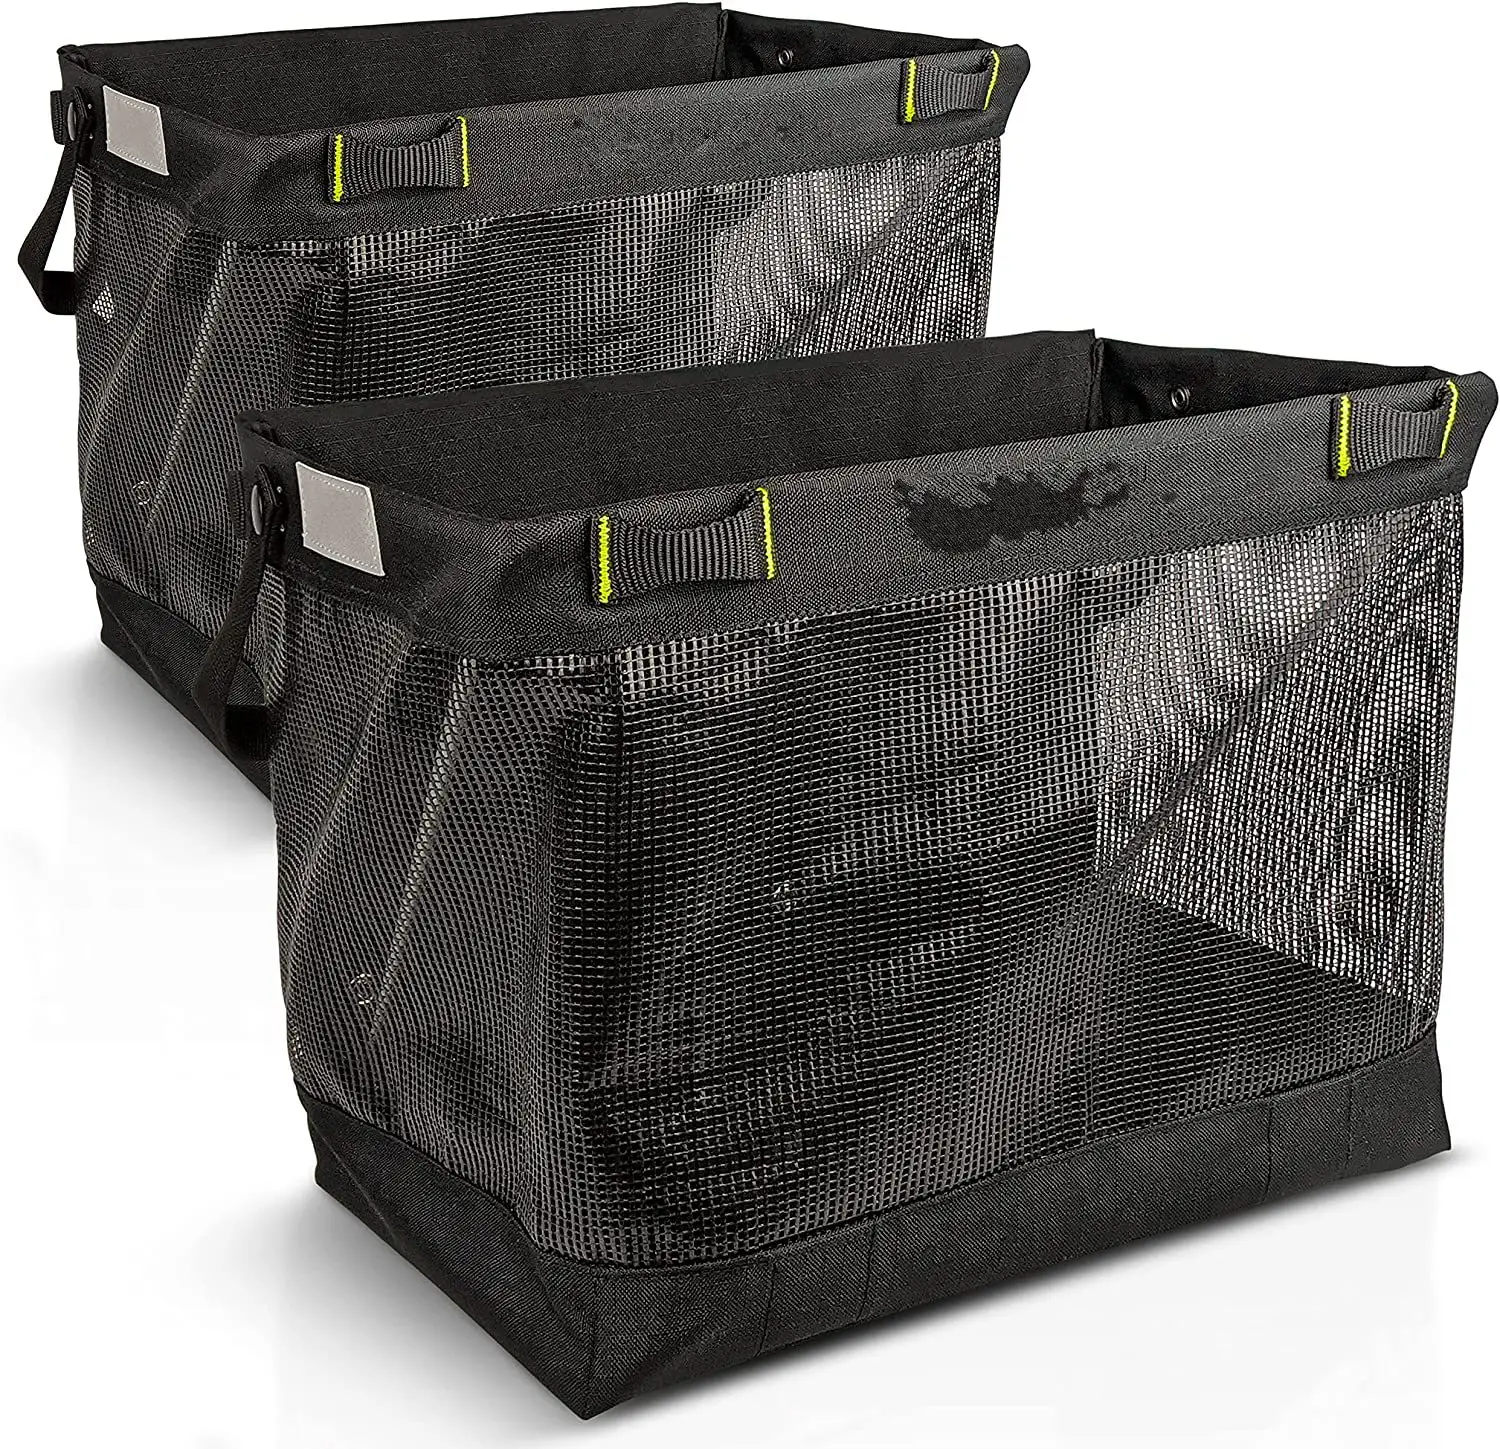 FREE SAMPLE Bike Mule - Grocery Pannier Bags - The Ultimate Carrier Baskets for Shopping with Your Bicycle - Pair